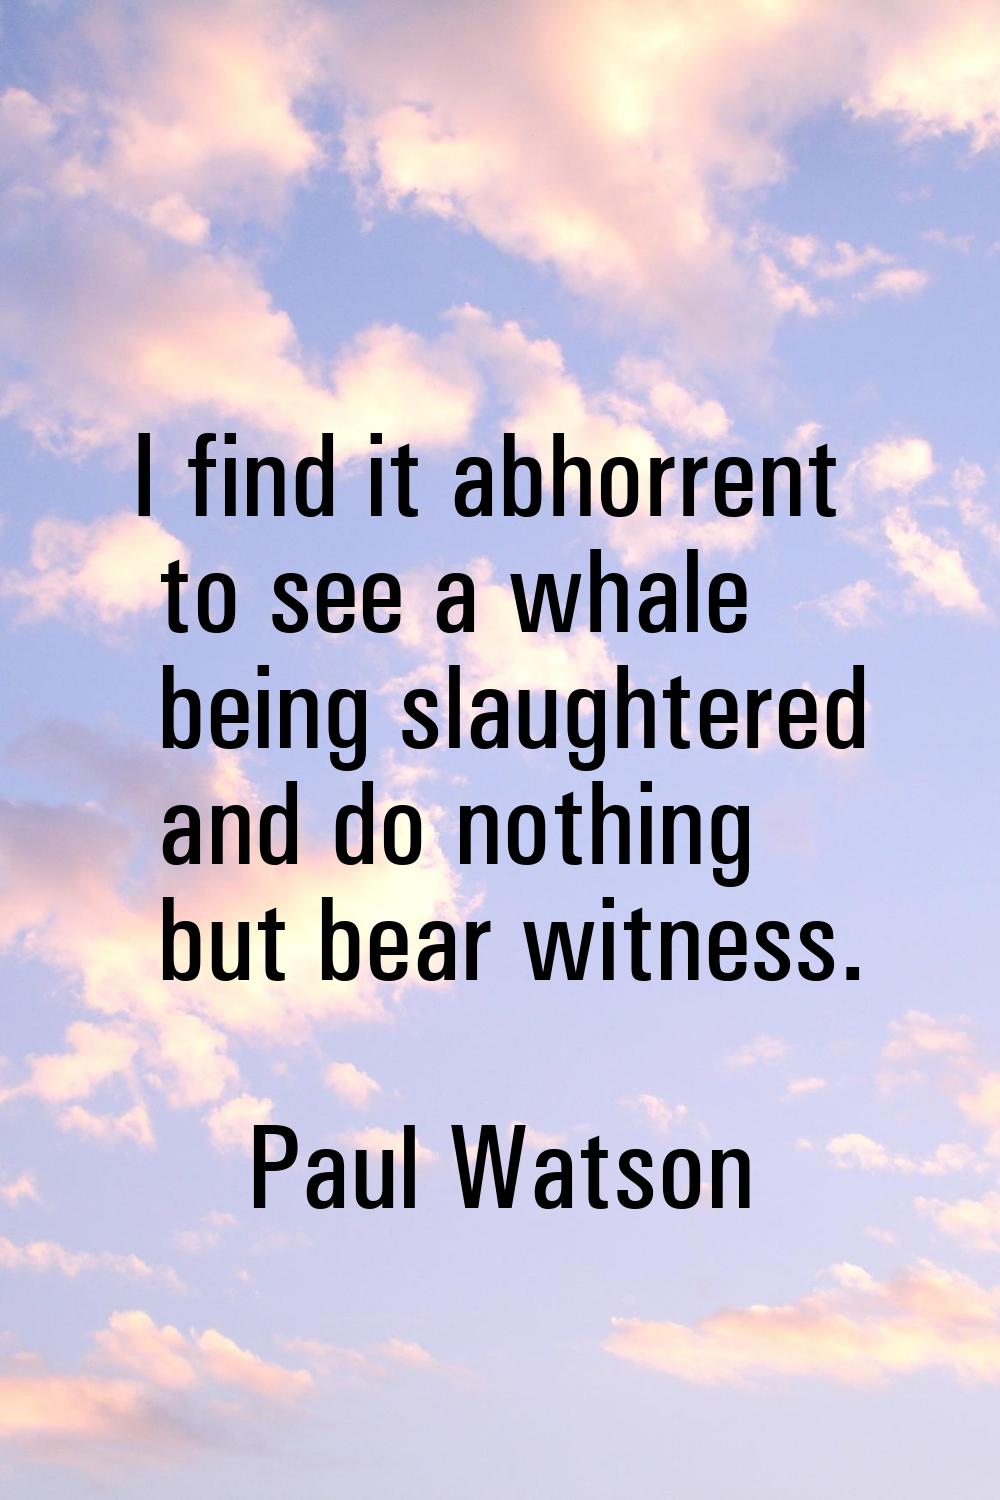 I find it abhorrent to see a whale being slaughtered and do nothing but bear witness.